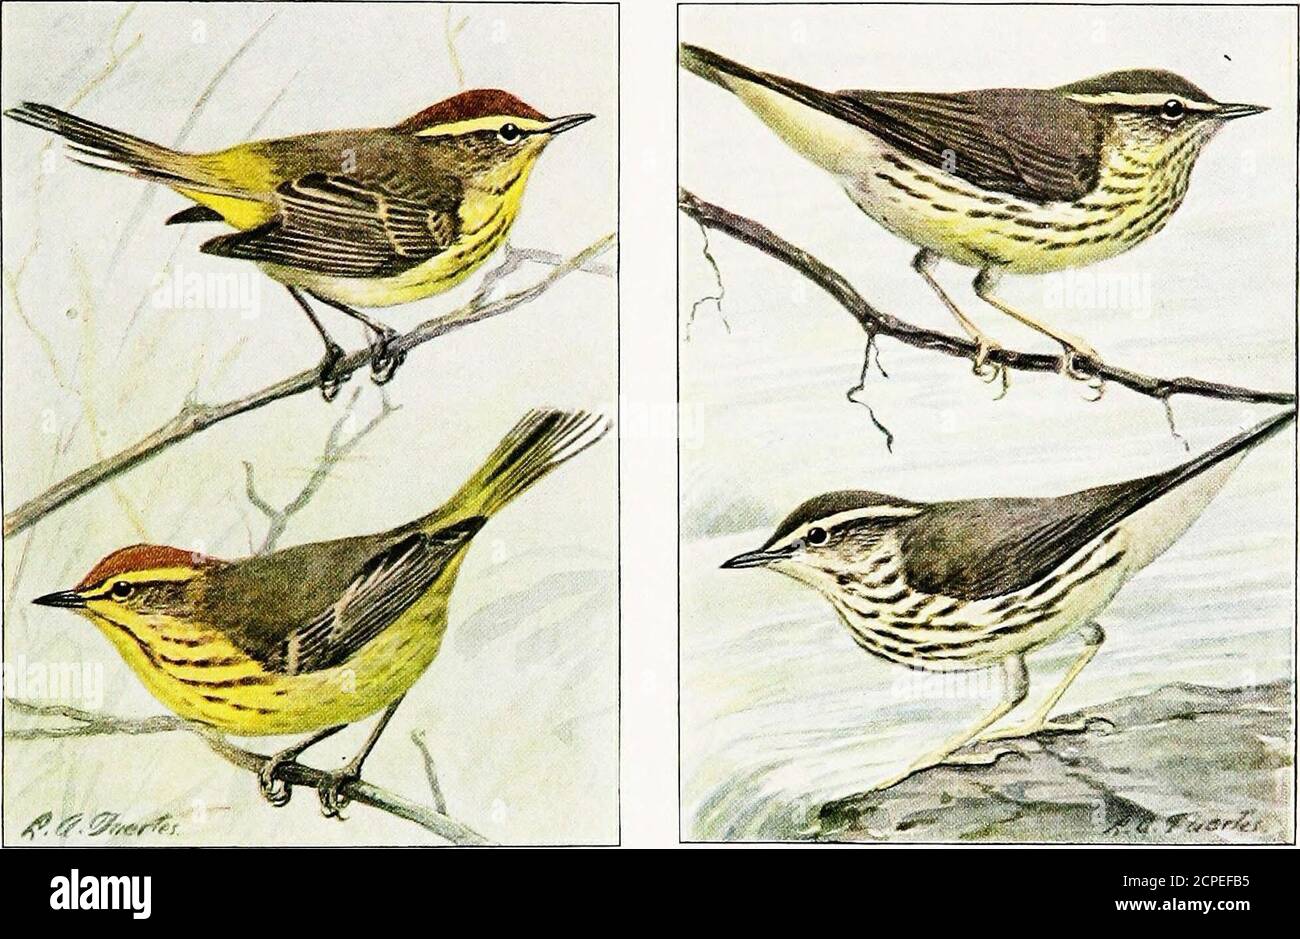 . The book of birds, common birds of town and country and American game birds . EAVBREASTED WARBLERMale and Female BLACK-THROATED GREEN WARBLERMale and Female BLACK-THROATED GRAY WARBLER PINE WARBLER 92. Stock Photo